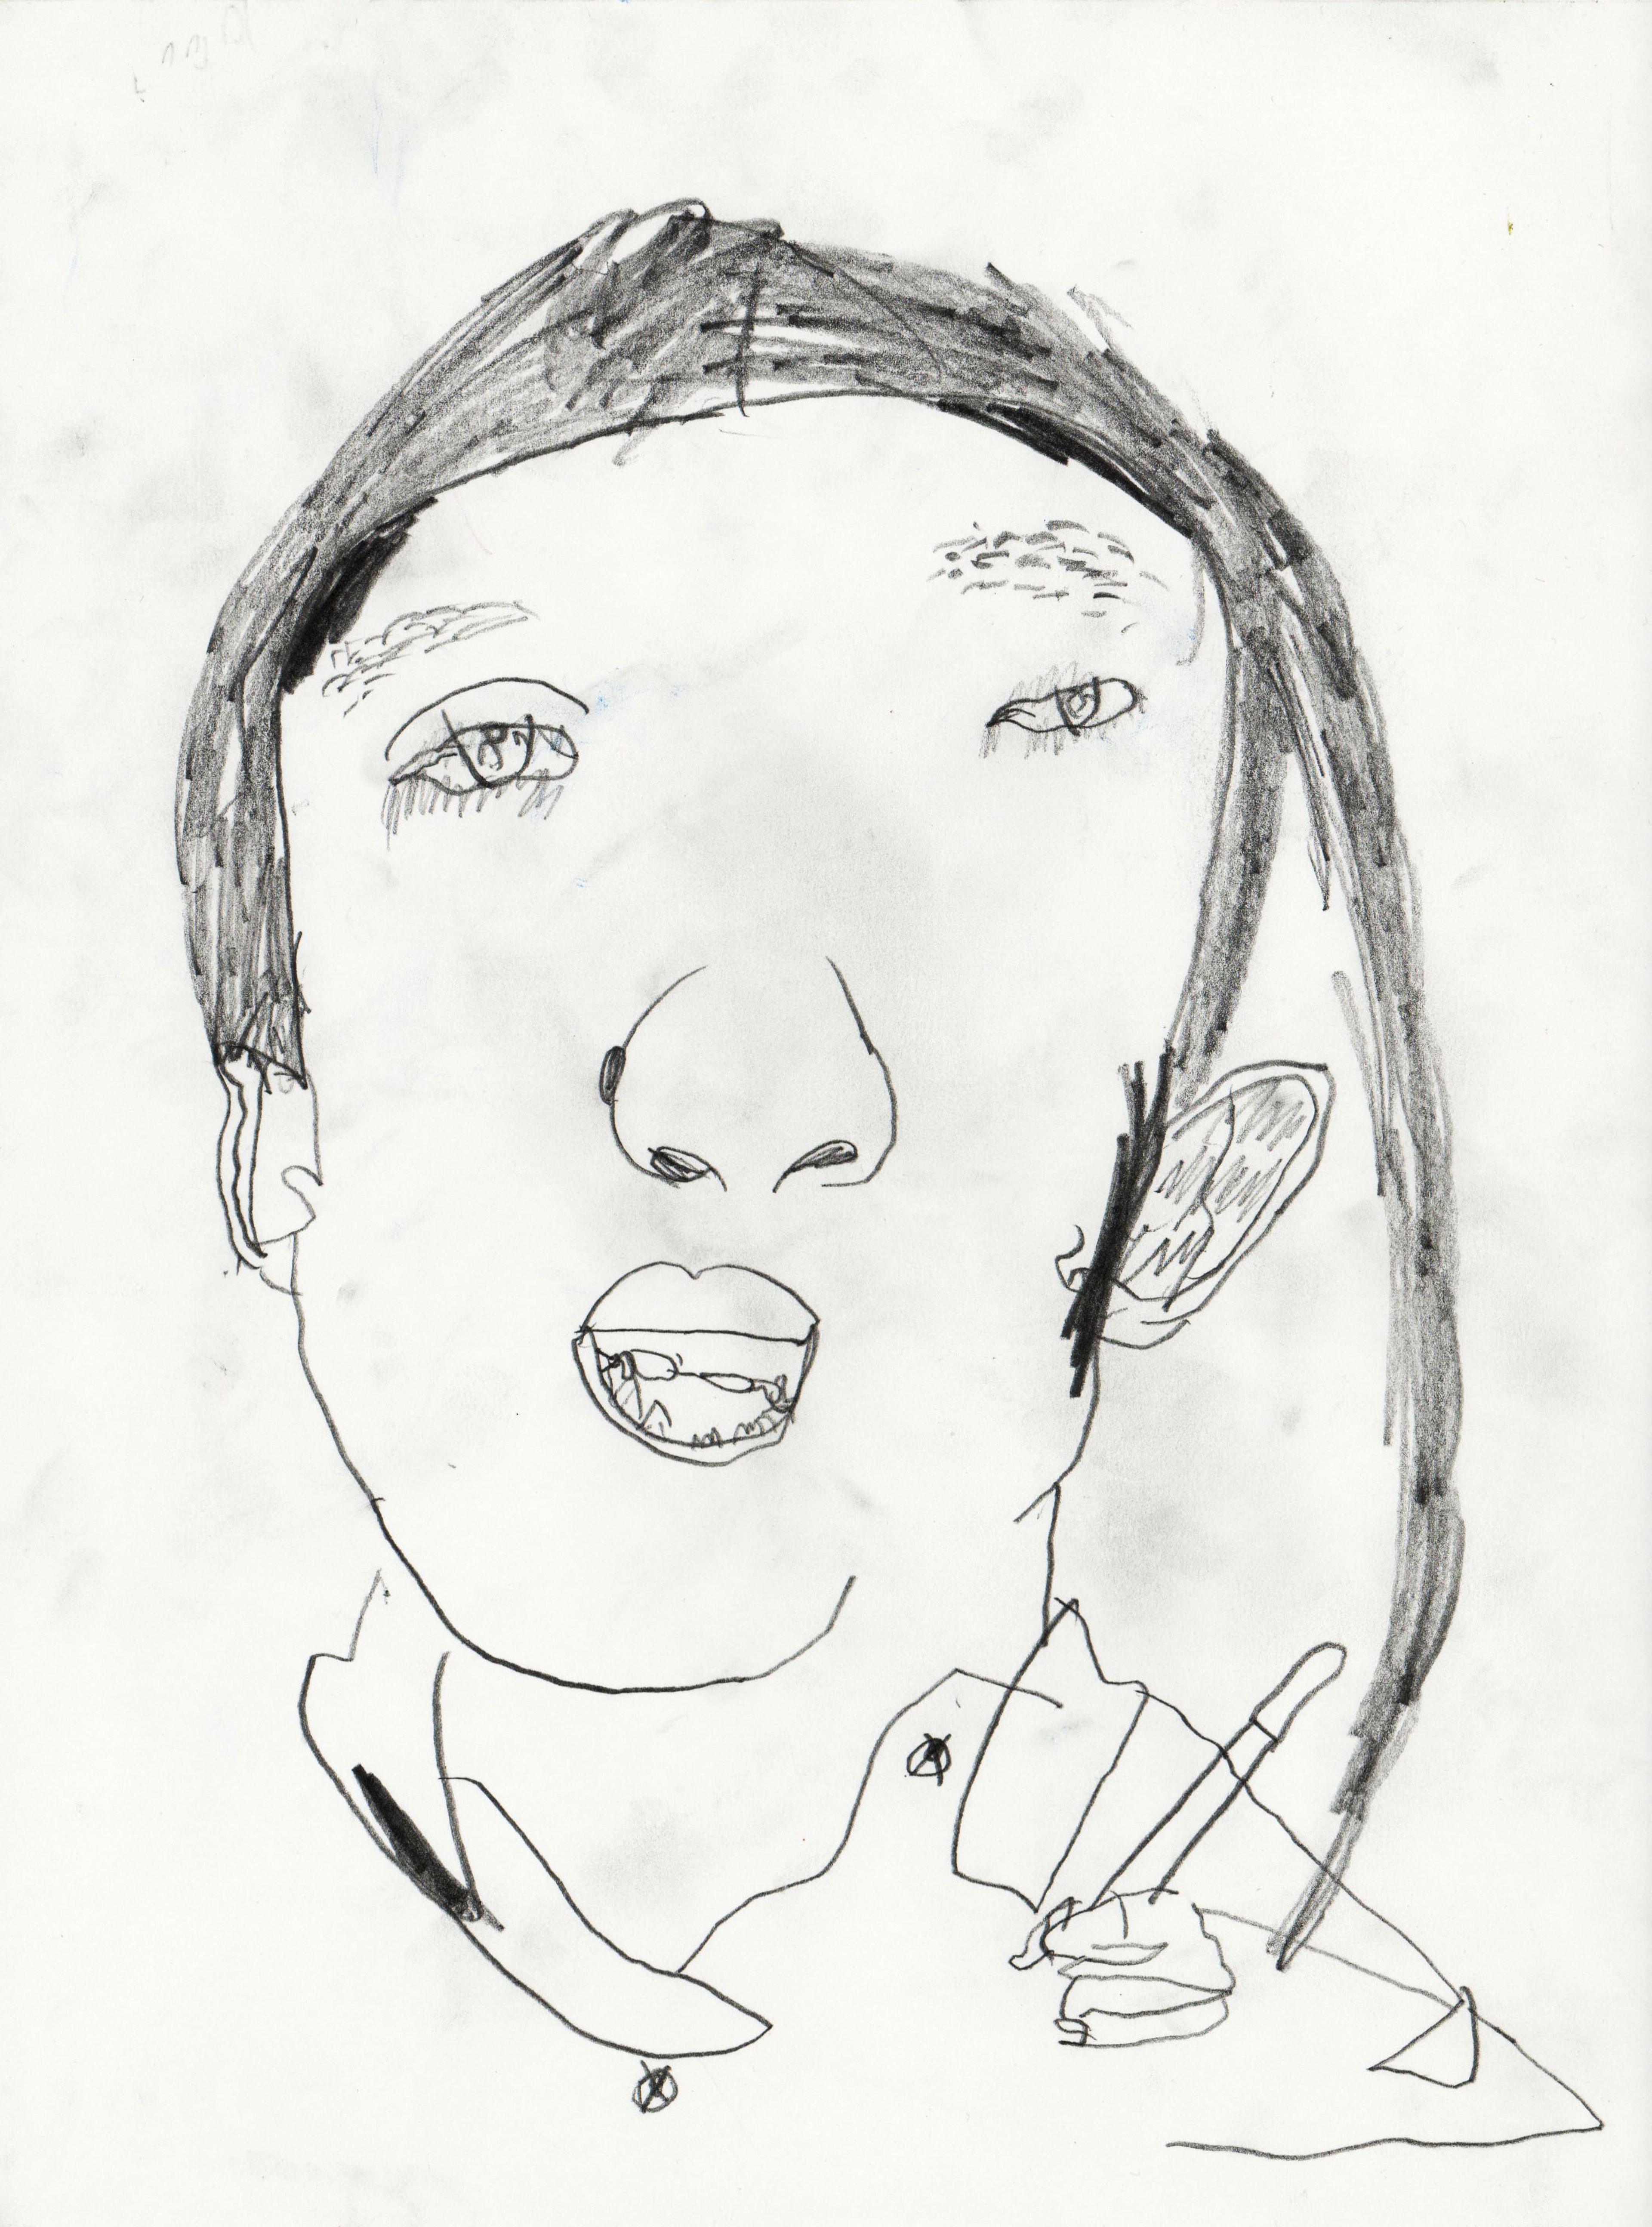 Black-and-white-pencil self-portrait of a young boy with dark hair facing the viewer. A single long strand of hair hangs off to the right of his head, extended down past his left shoulder. His eyes are far apart, and the tip of his nose is large. His mouth is slightly open, displaying his teeth and tongue. The collar of the boy's shirt and top buttons are represented below his neck, and his left hand is drawn very small at right beneath his left shoulder, with his fingers holding a pencil.